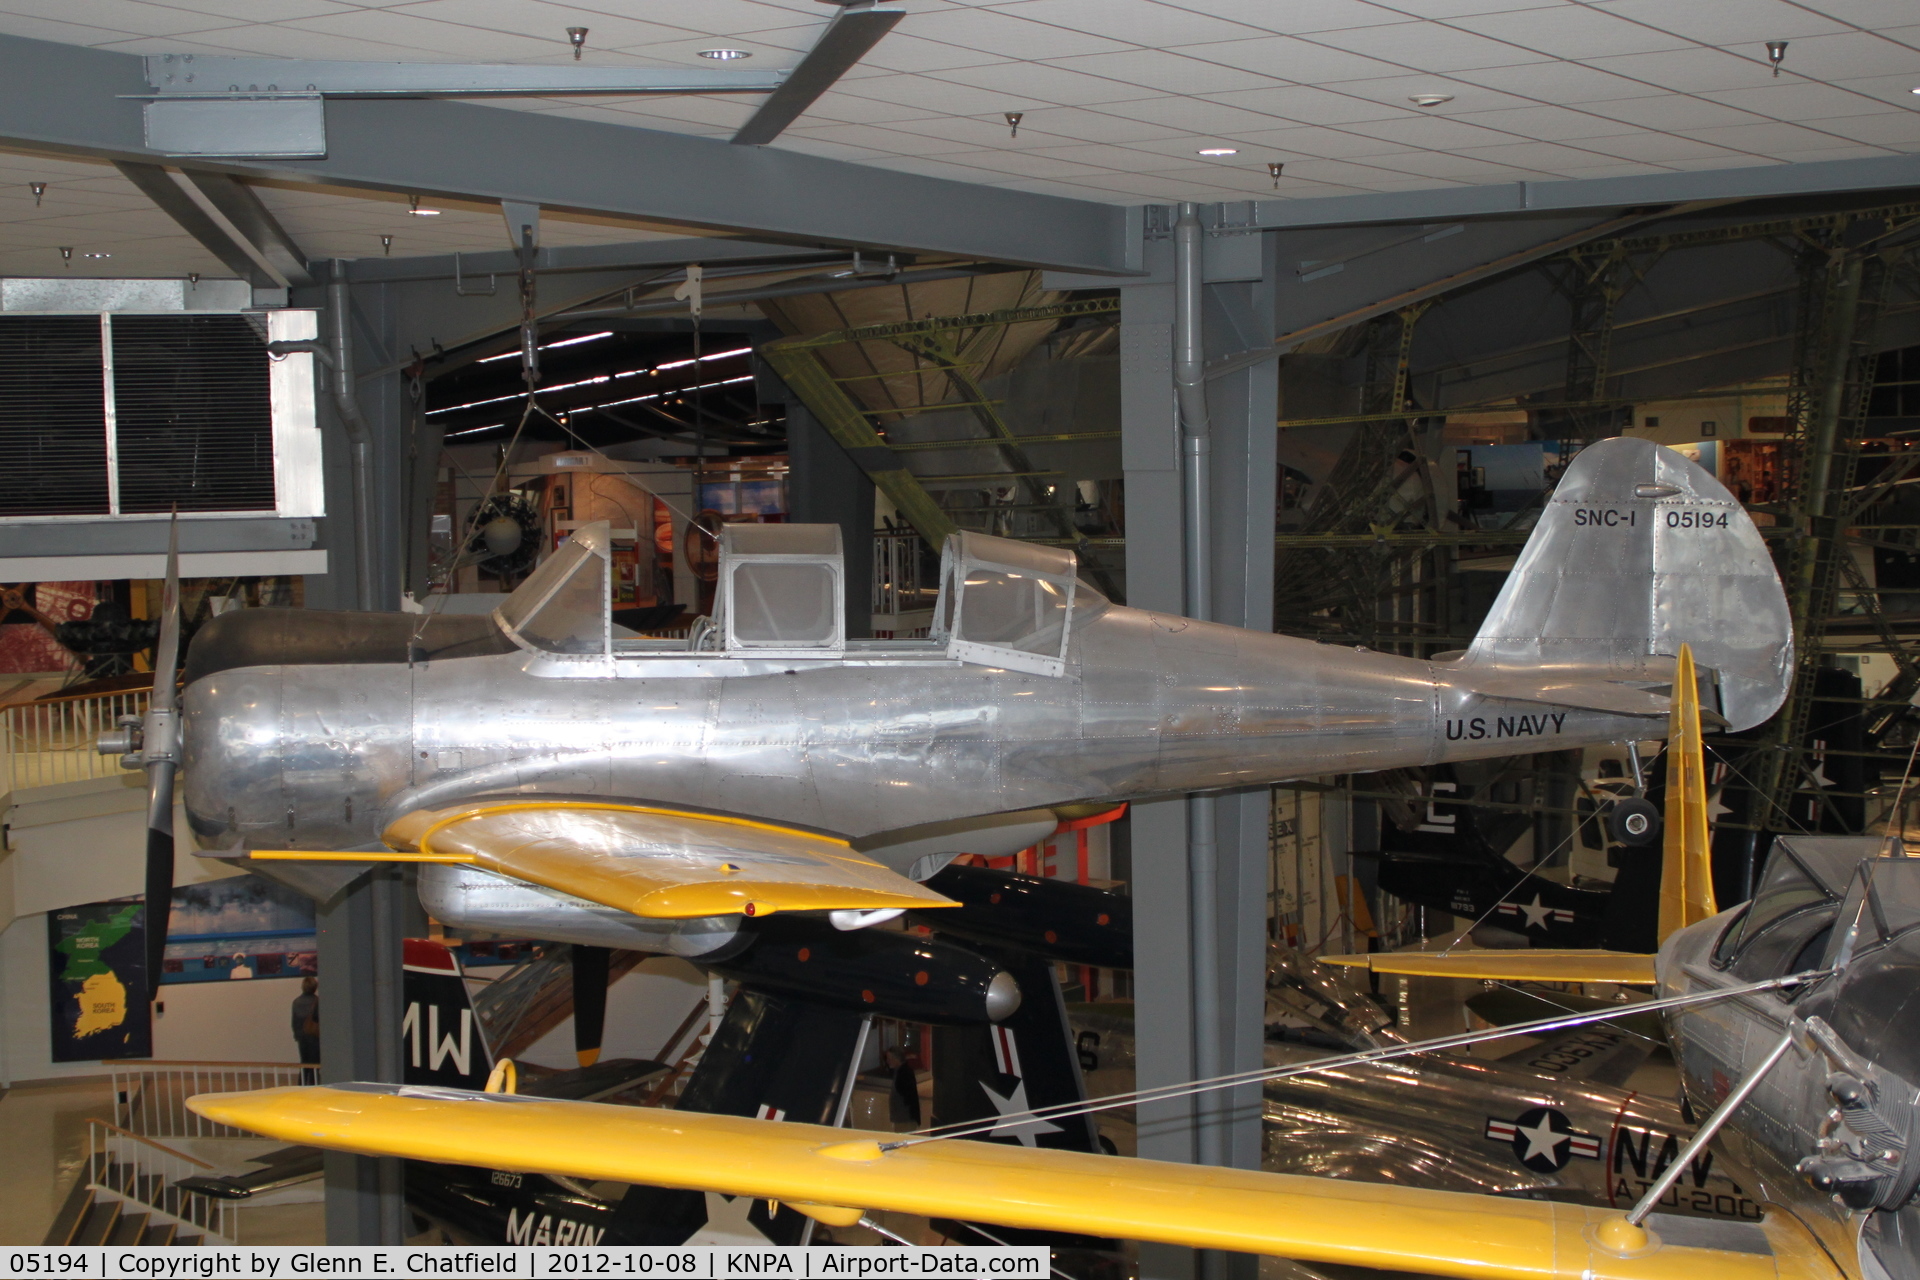 05194, 1941 Curtiss-Wright SNC-1 C/N 4255, Naval Aviation Museum. Battle of Midway veteran